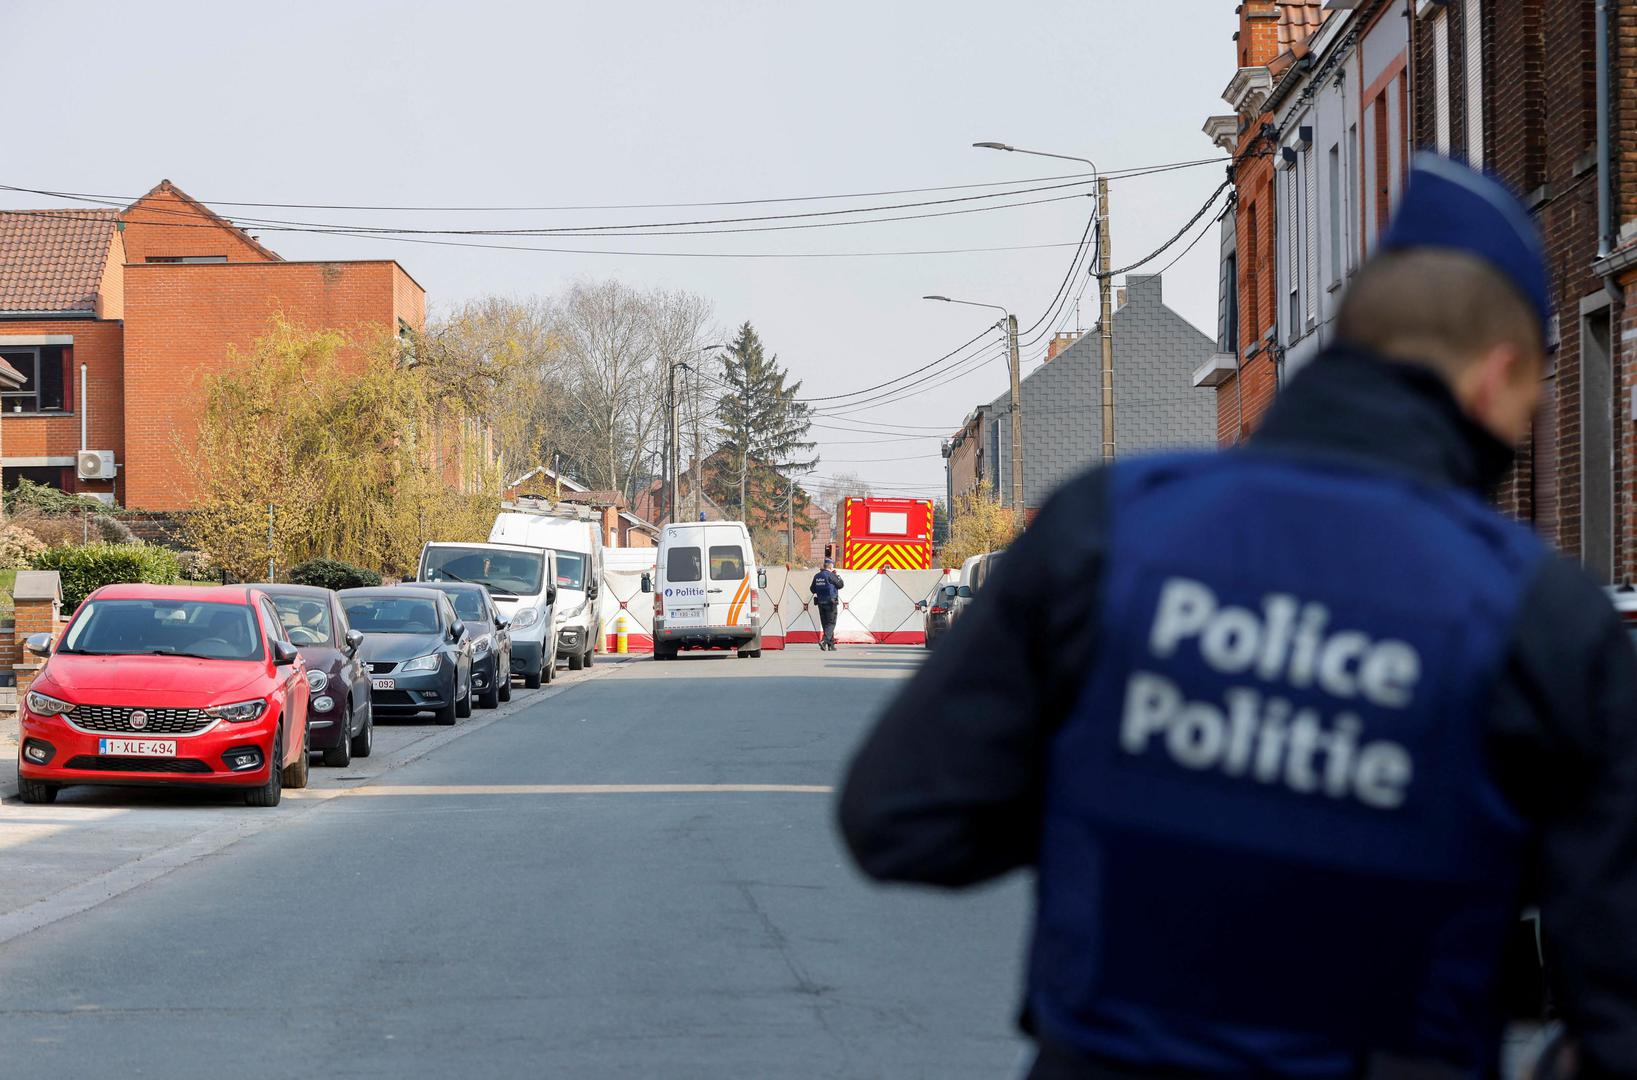 Police officers patrol at the site where a vehicle drove into a group of Belgian carnival performers who were preparing for a parade in the village of Strepy-Bracquegnies, Belgium March 20, 2022. REUTERS/Johanna Geron Photo: JOHANNA GERON/REUTERS